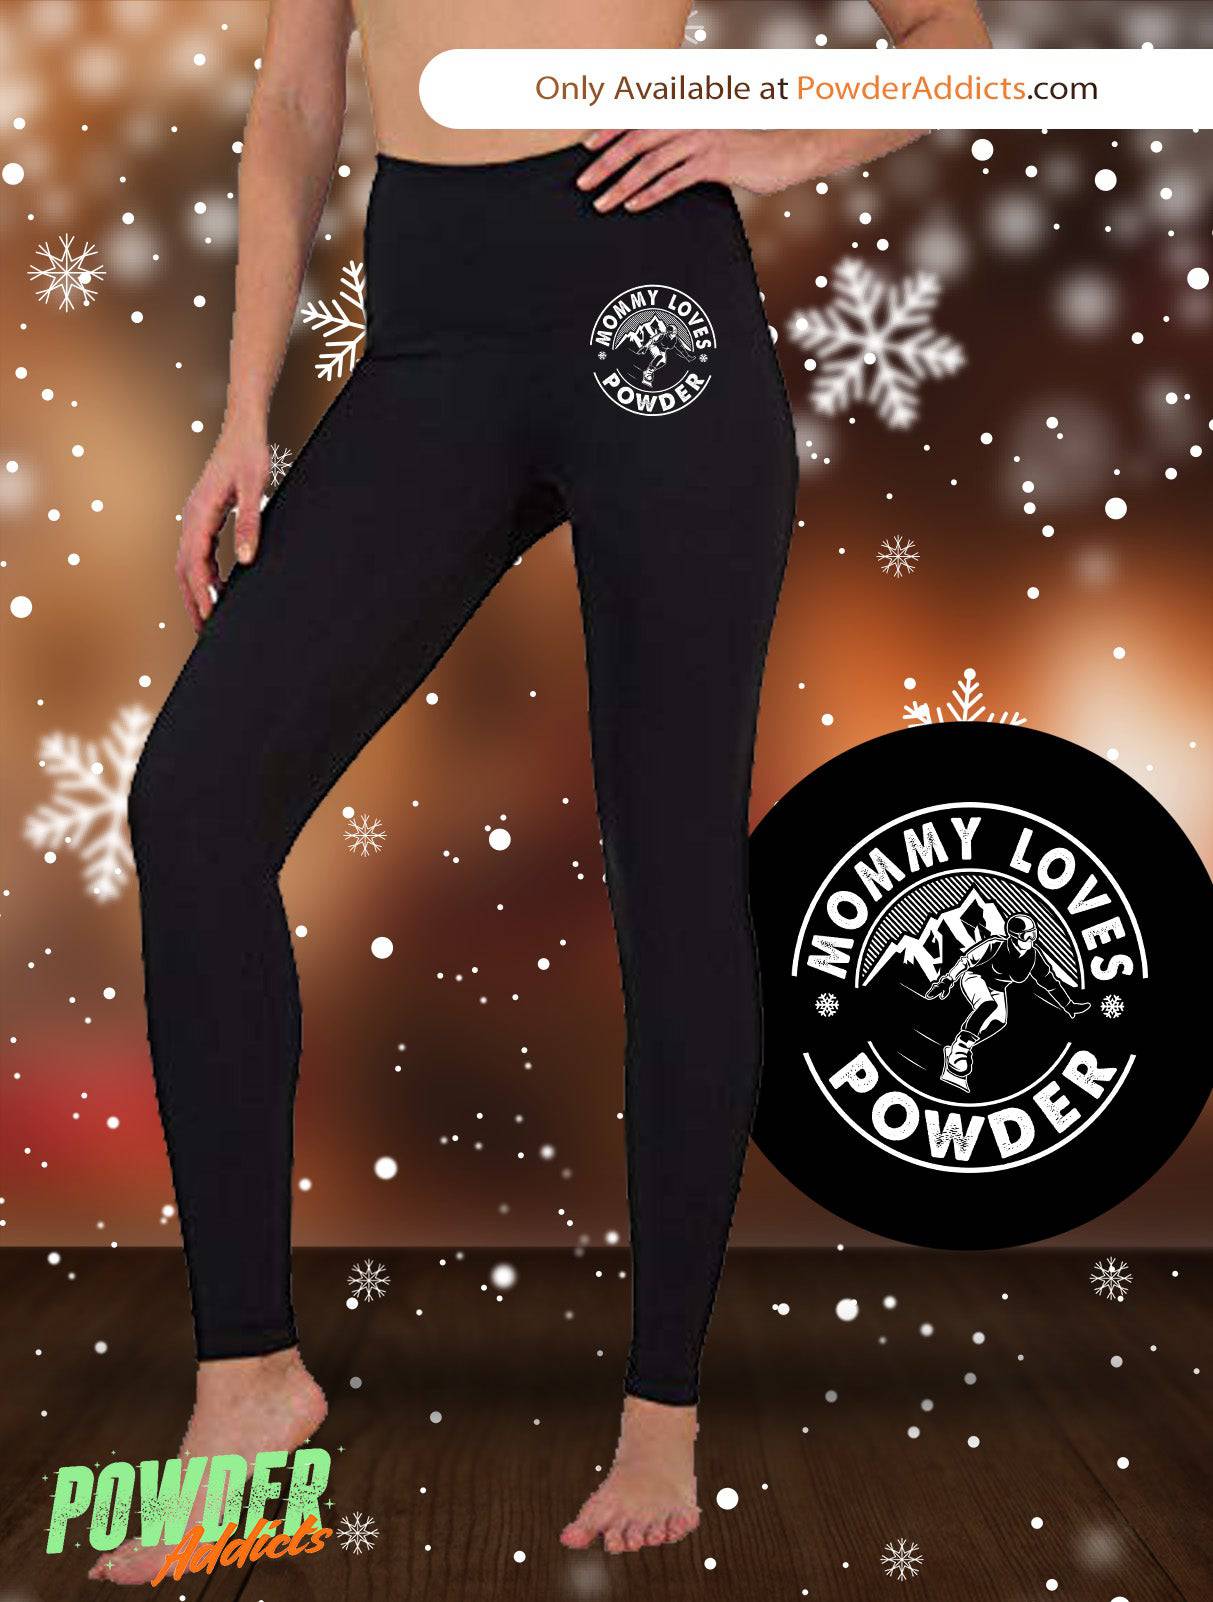 Mommy Loves Powder Women's Embroidered Leggings - Powderaddicts